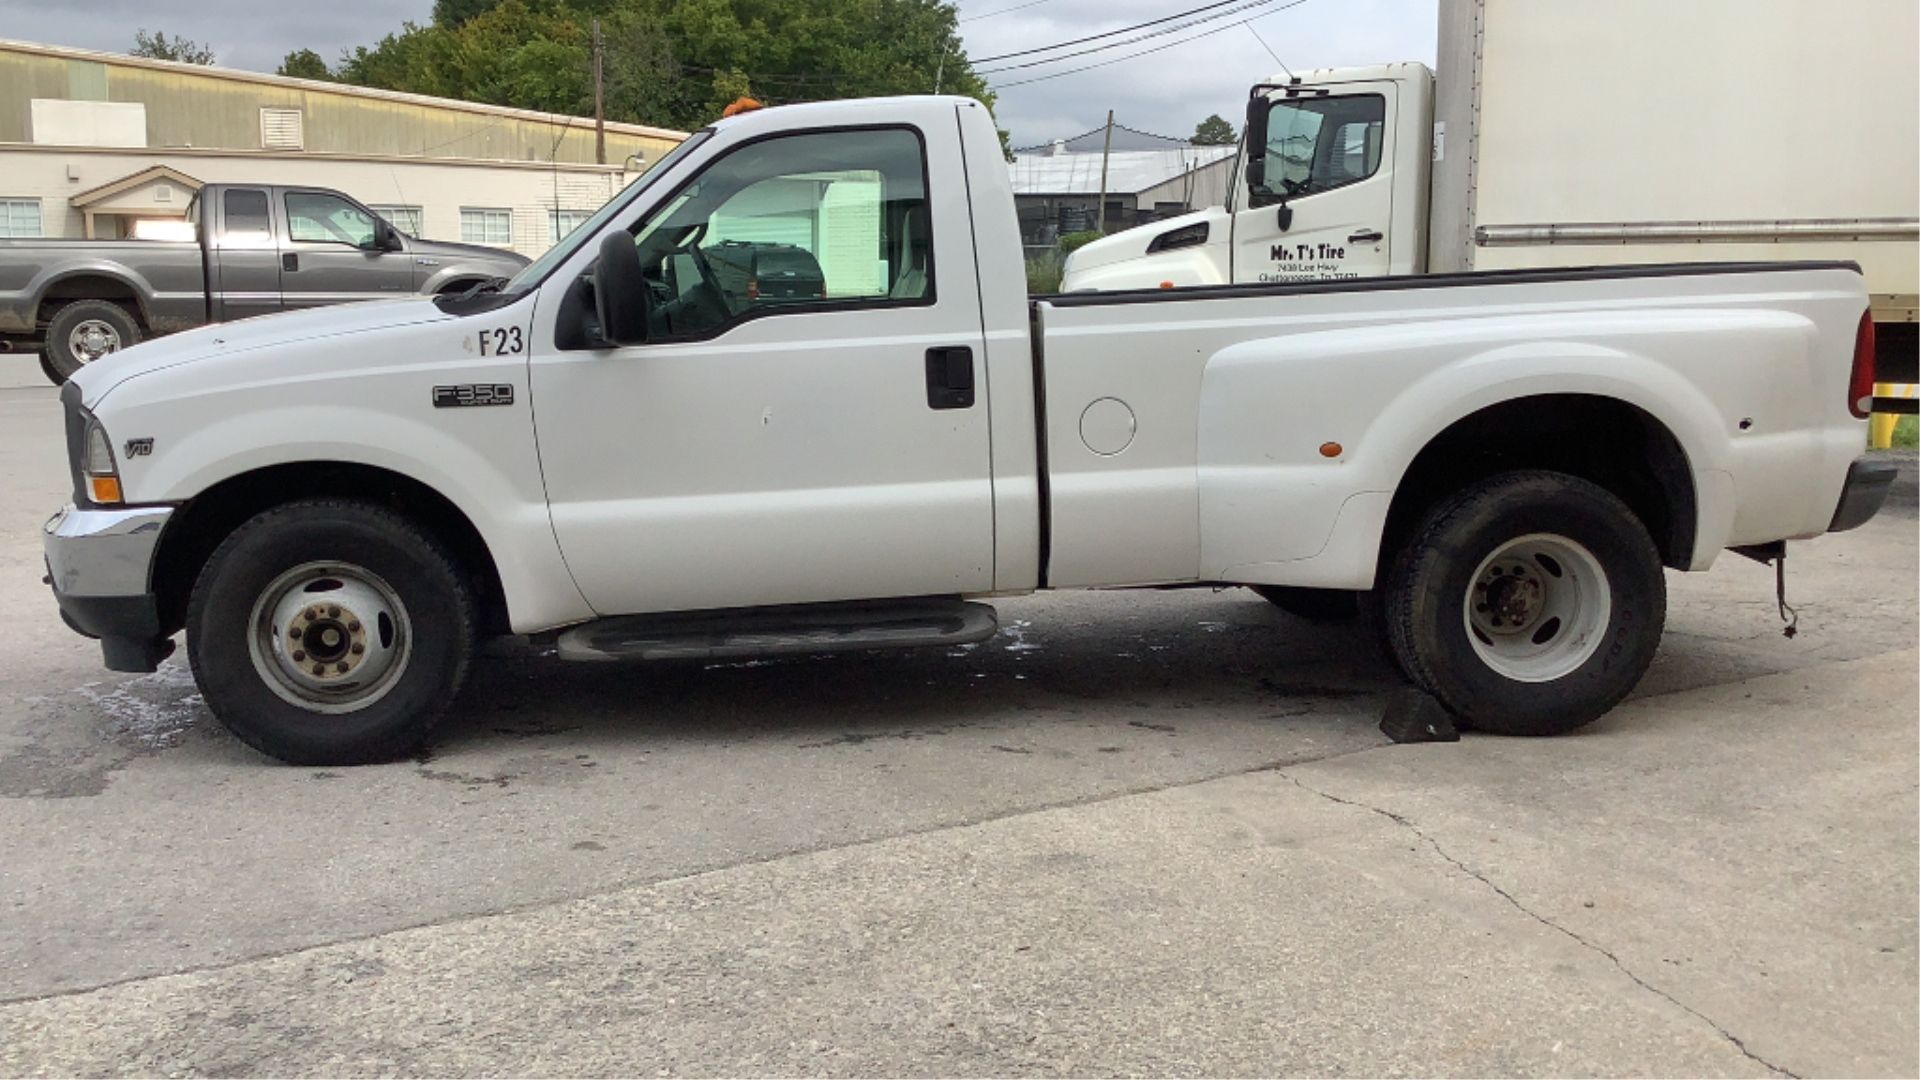 2002 Ford F-350 Regular Cab Dually 2WD - Image 13 of 89